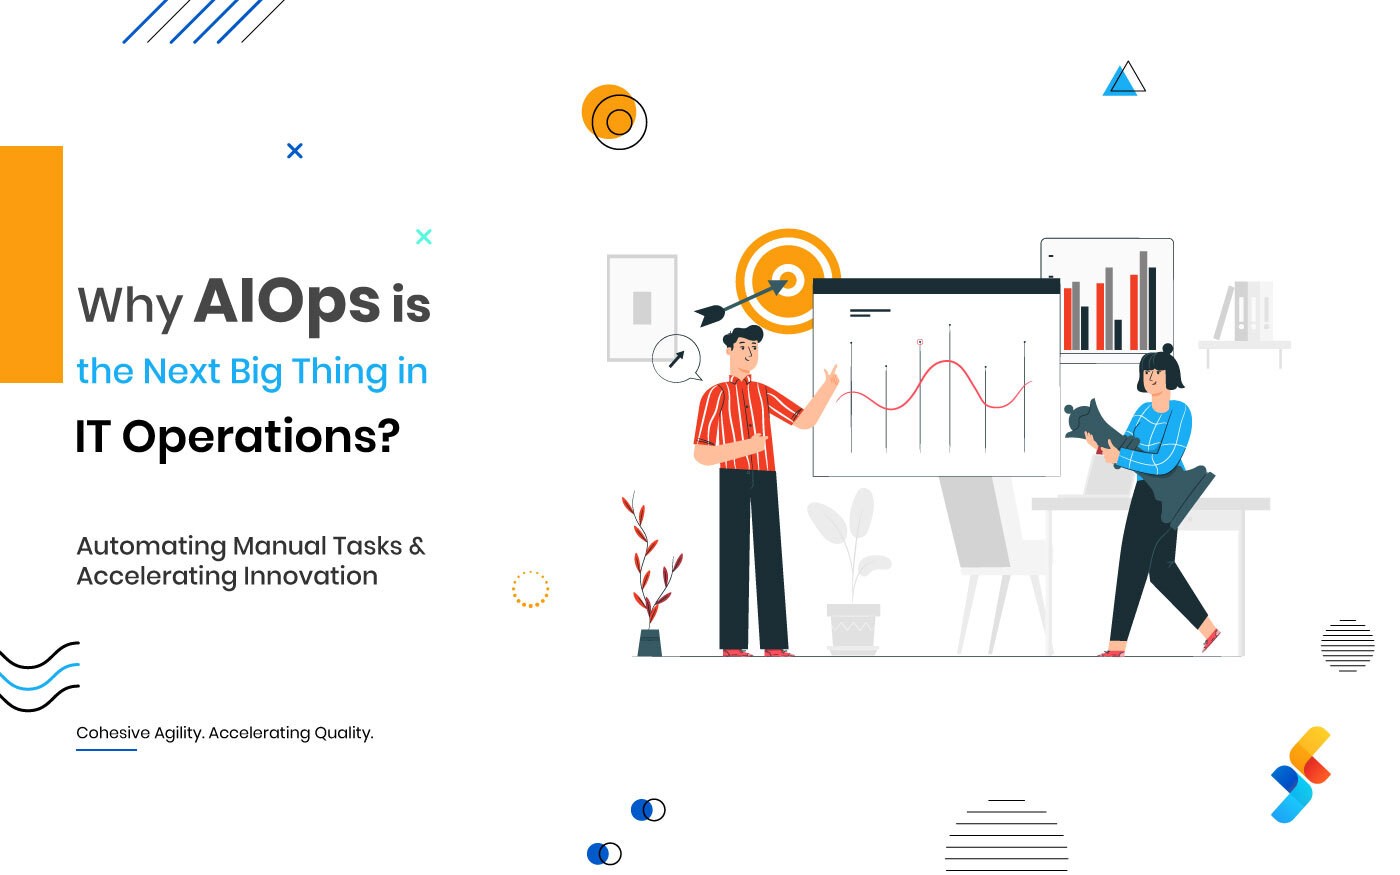 Why AIOps is the Next Big Thing in IT Operations?